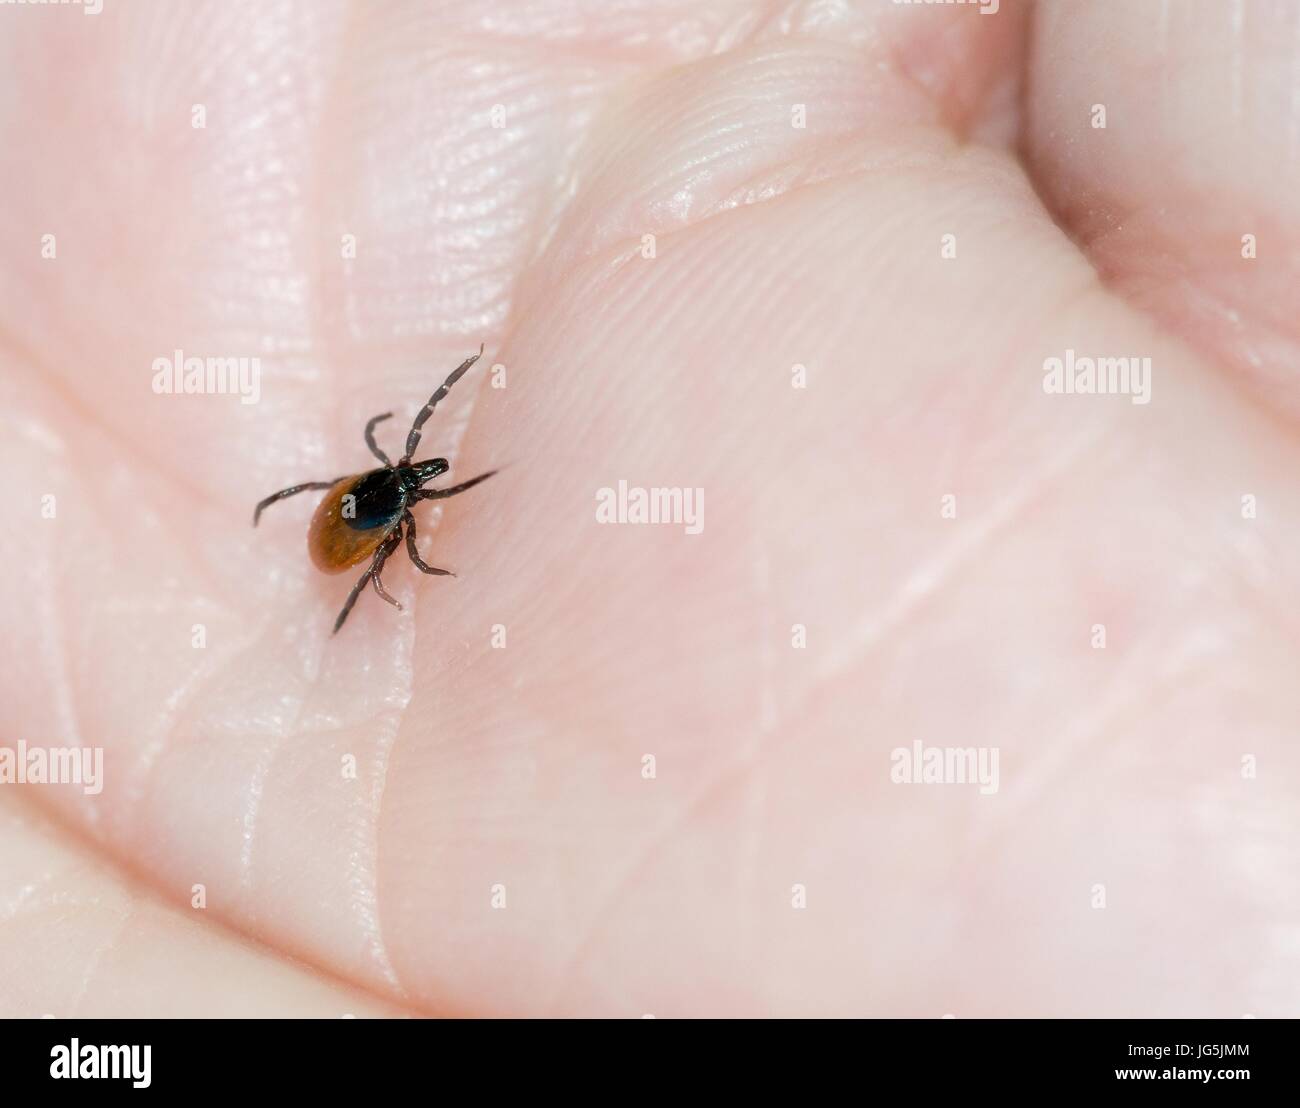 Castor Bean Tick (Ixodes ricinus) crawling over a man's skin, Lower Saxony, Germany Stock Photo